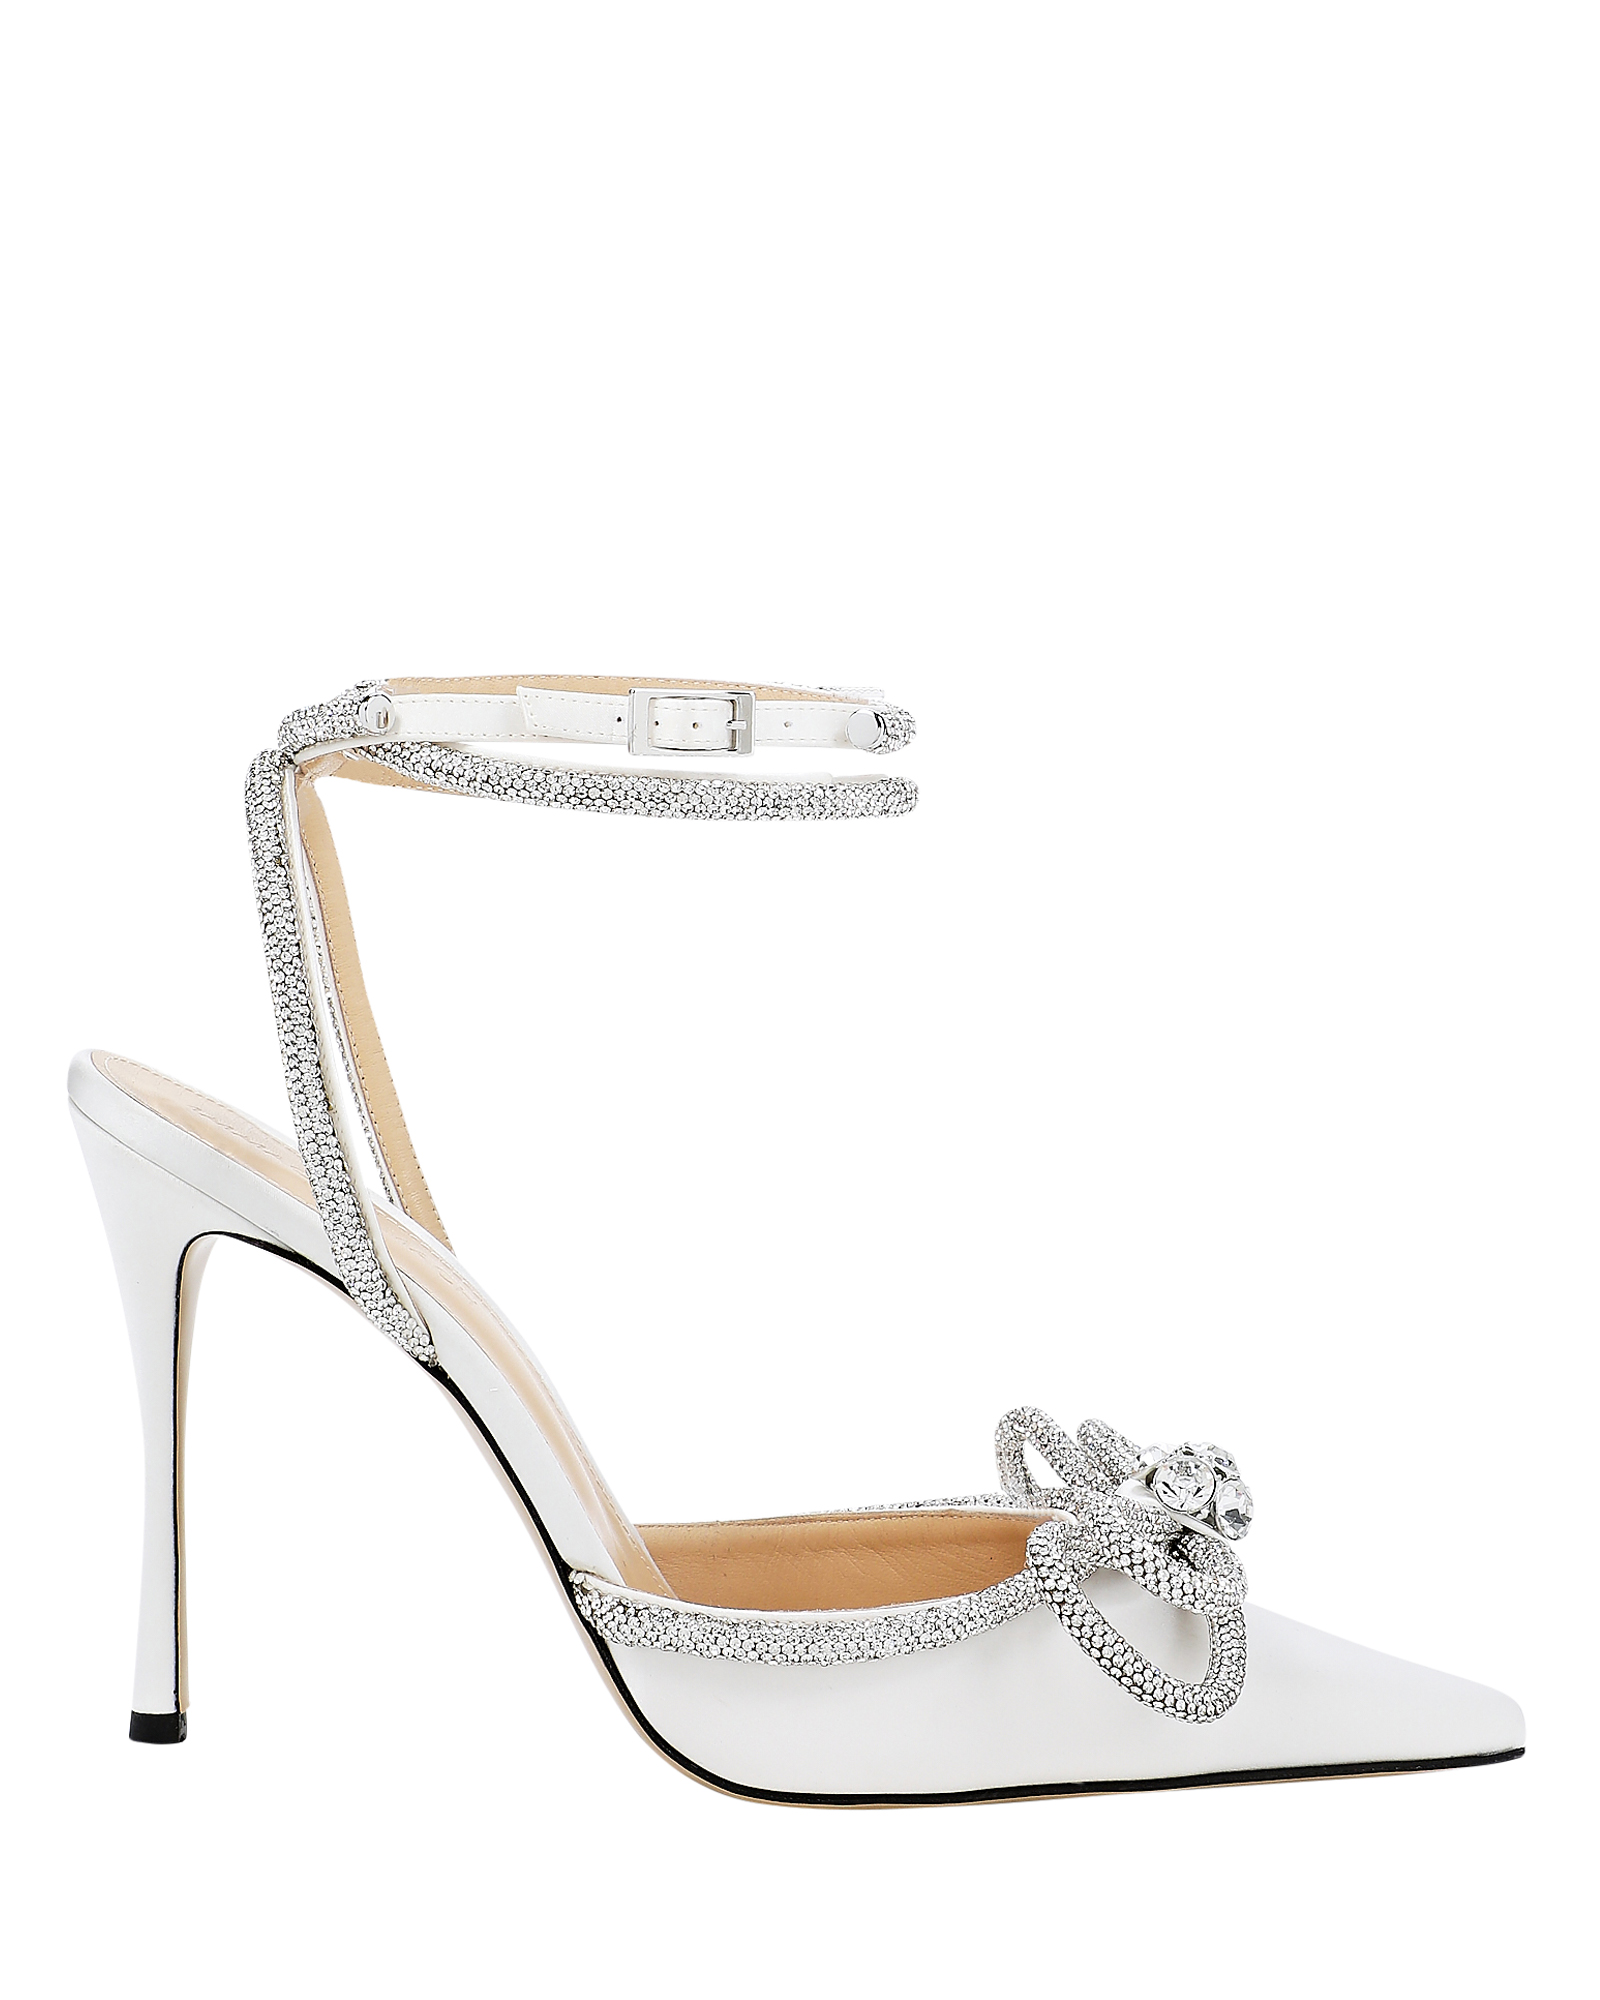 Double Bow Crystal Pumps | INTERMIX